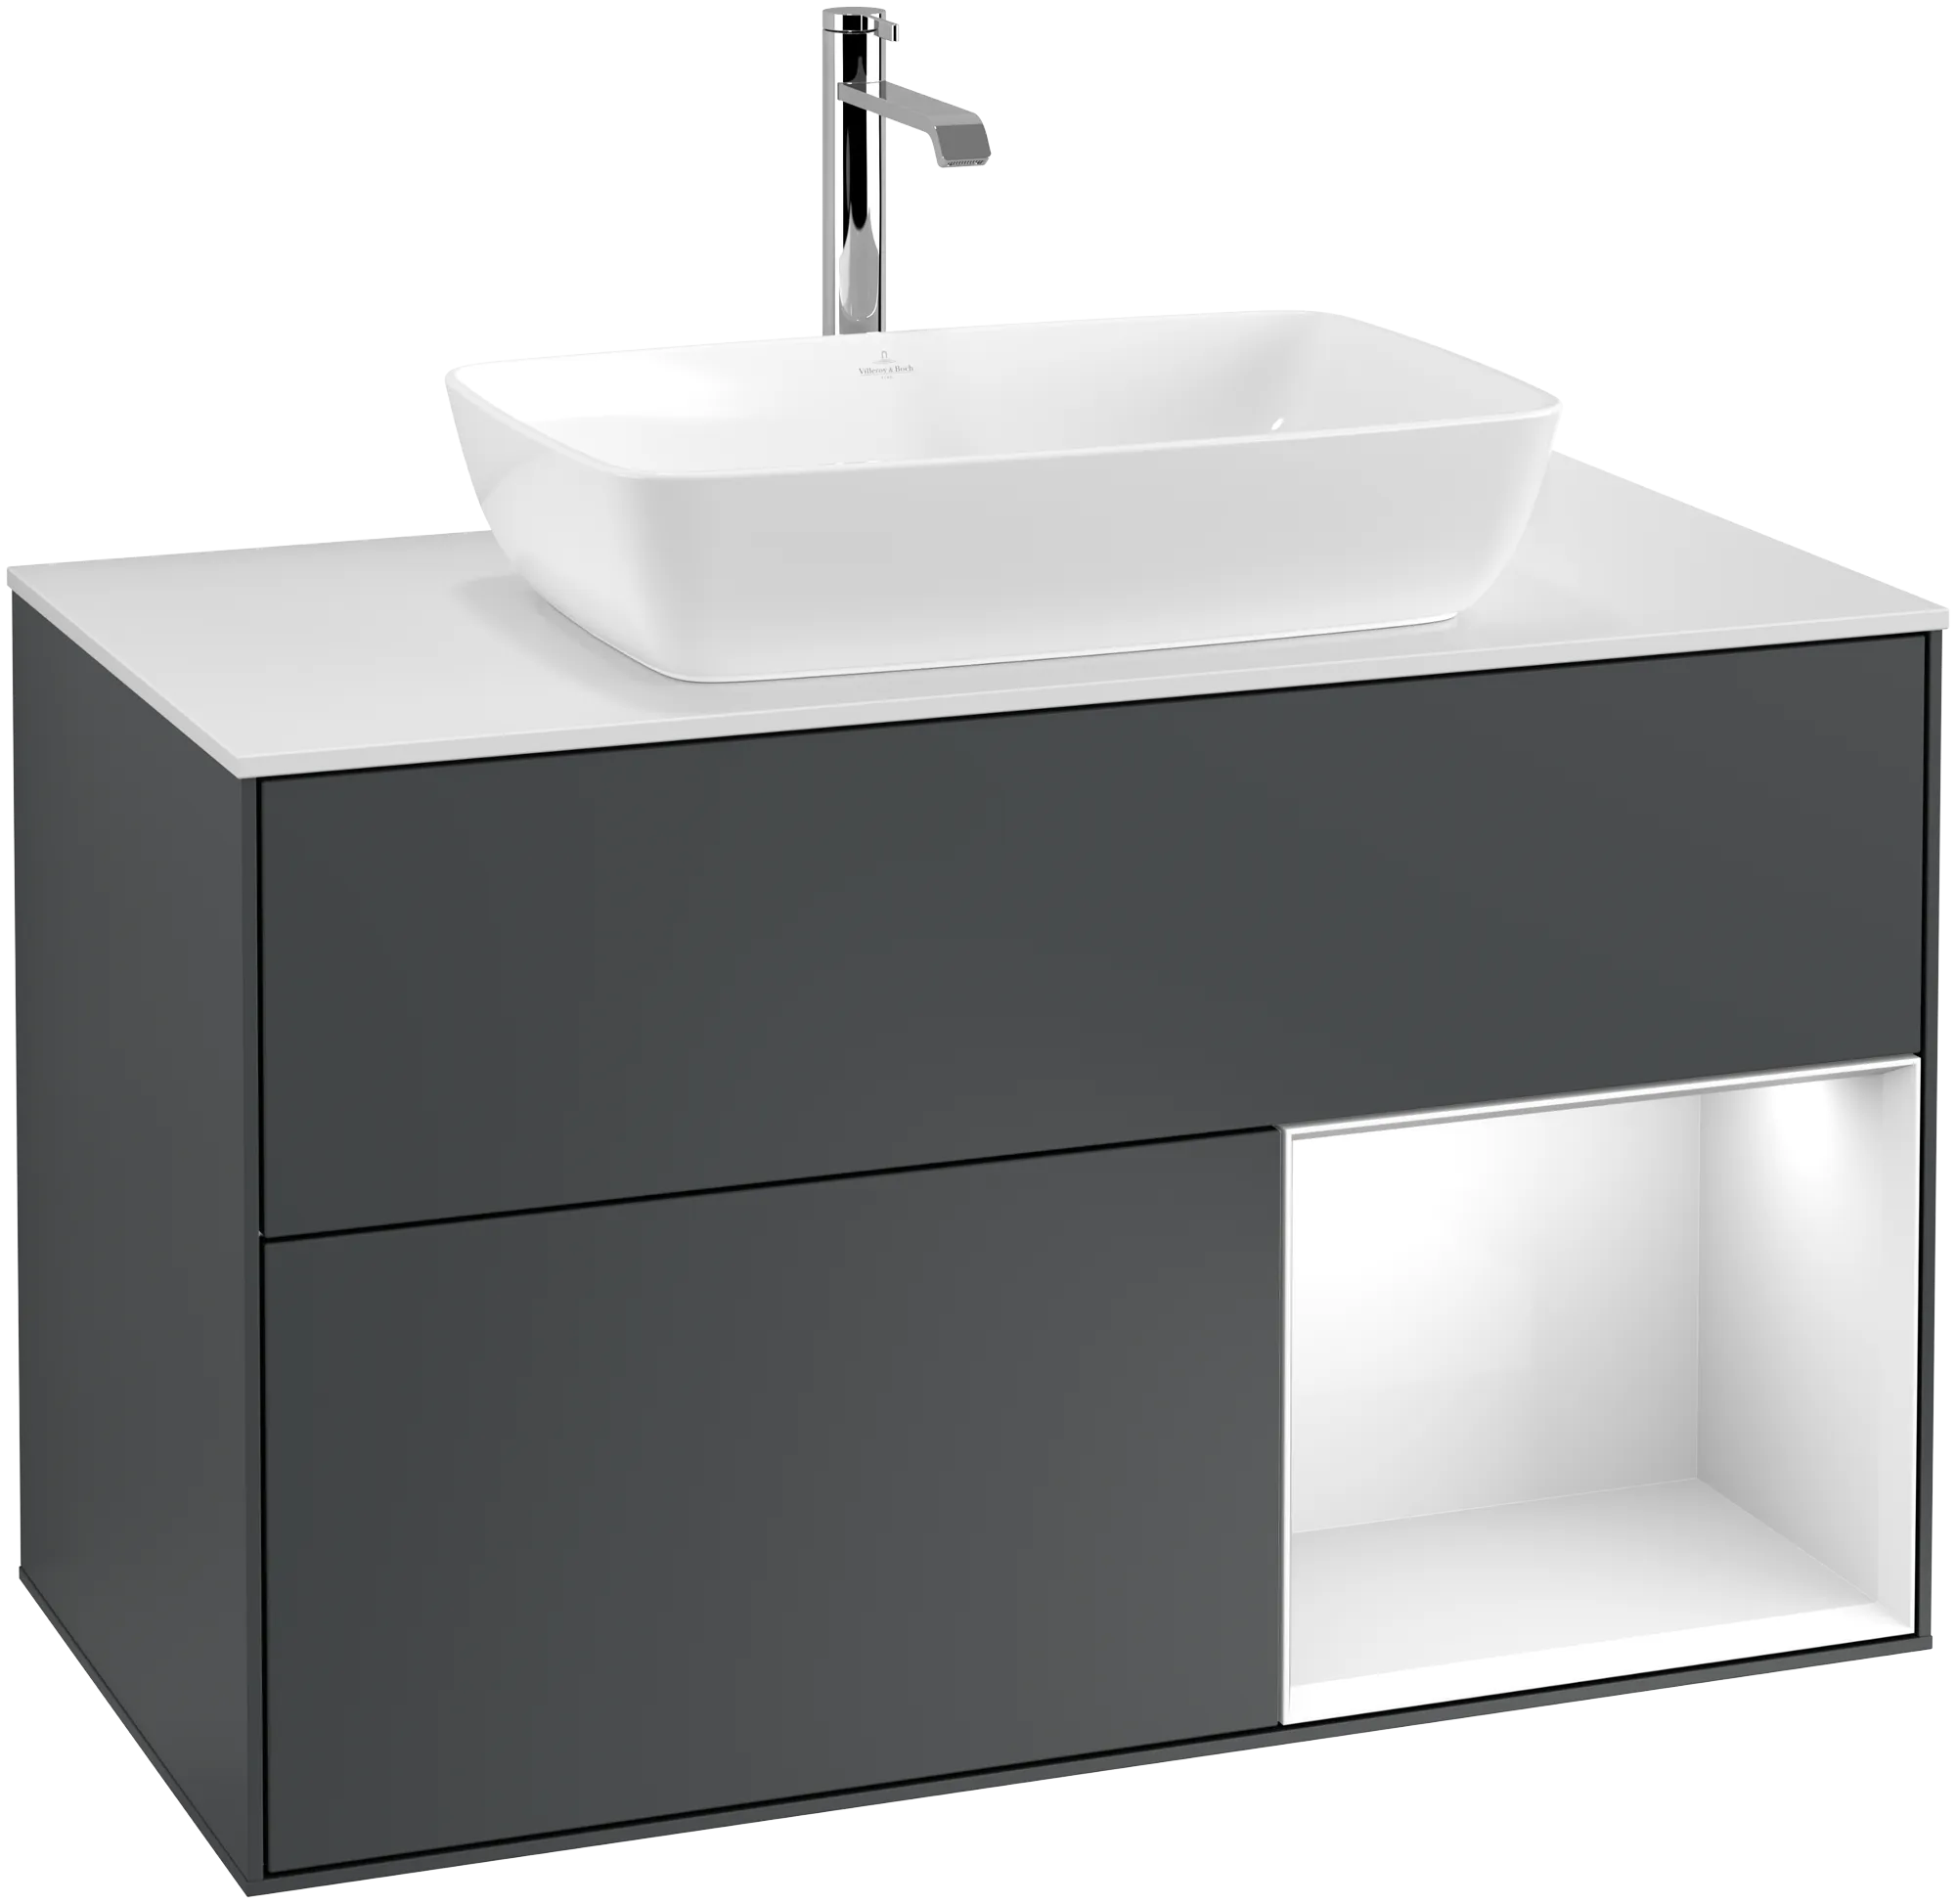 VILLEROY BOCH Finion Vanity unit, with lighting, 2 pull-out compartments, 1000 x 603 x 501 mm, Midnight Blue Matt Lacquer / Glossy White Lacquer / Glass White Matt #G781GFHG resmi